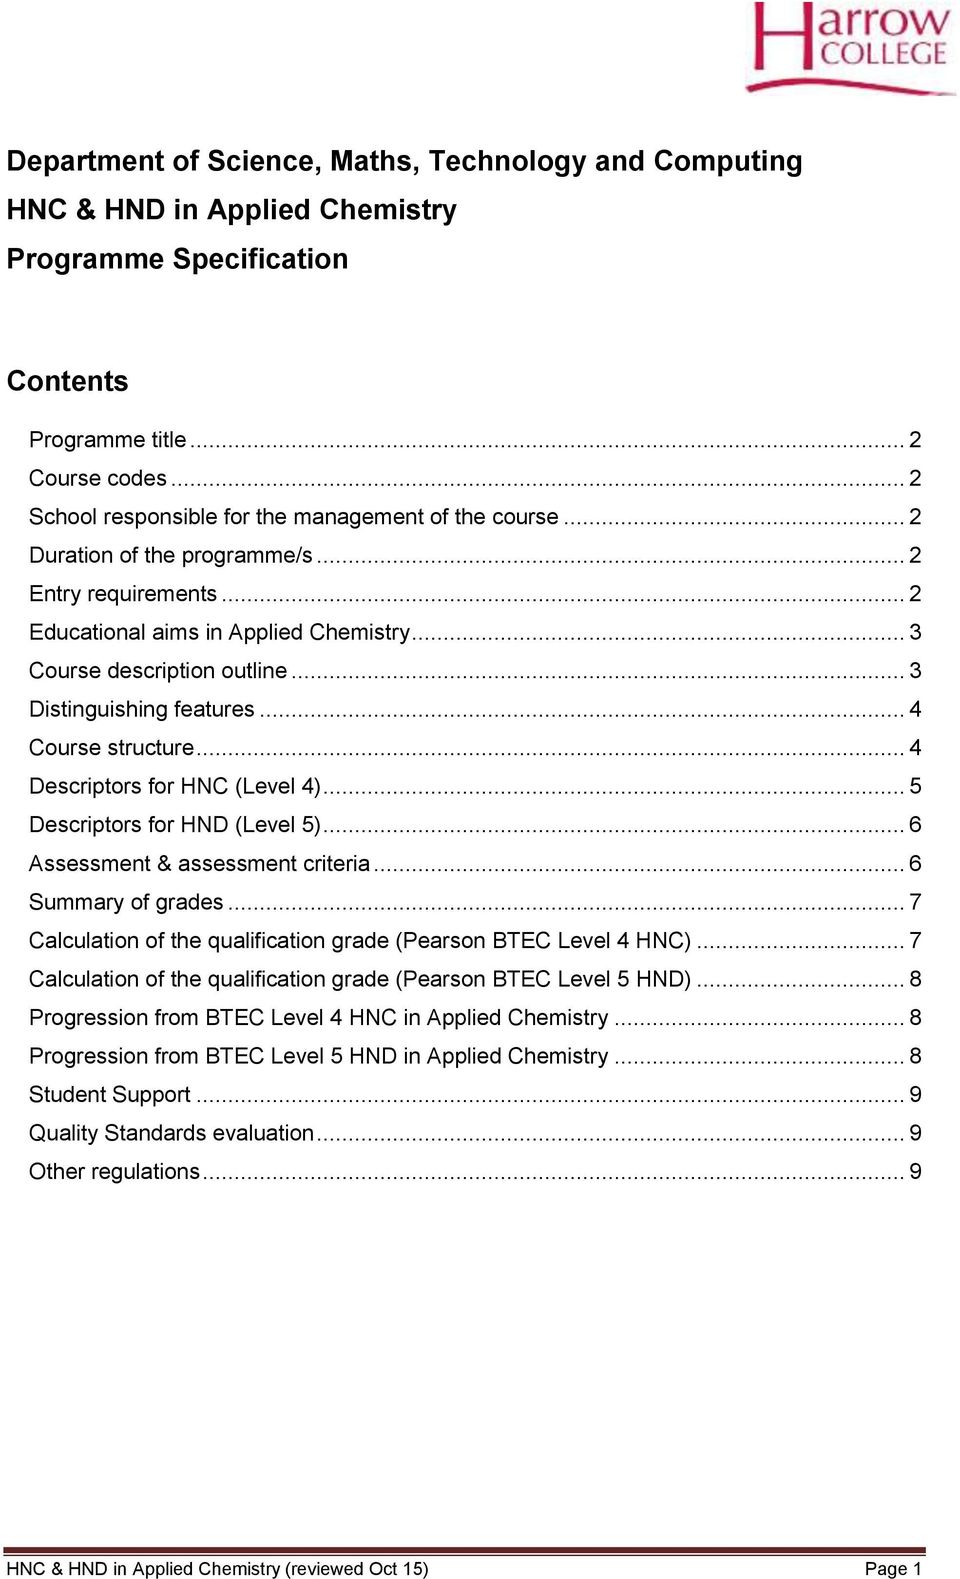 .. 3 Distinguishing features... 4 Course structure... 4 Descriptors for HNC (Level 4)... 5 Descriptors for HND (Level 5)... 6 Assessment & assessment criteria... 6 Summary of grades.